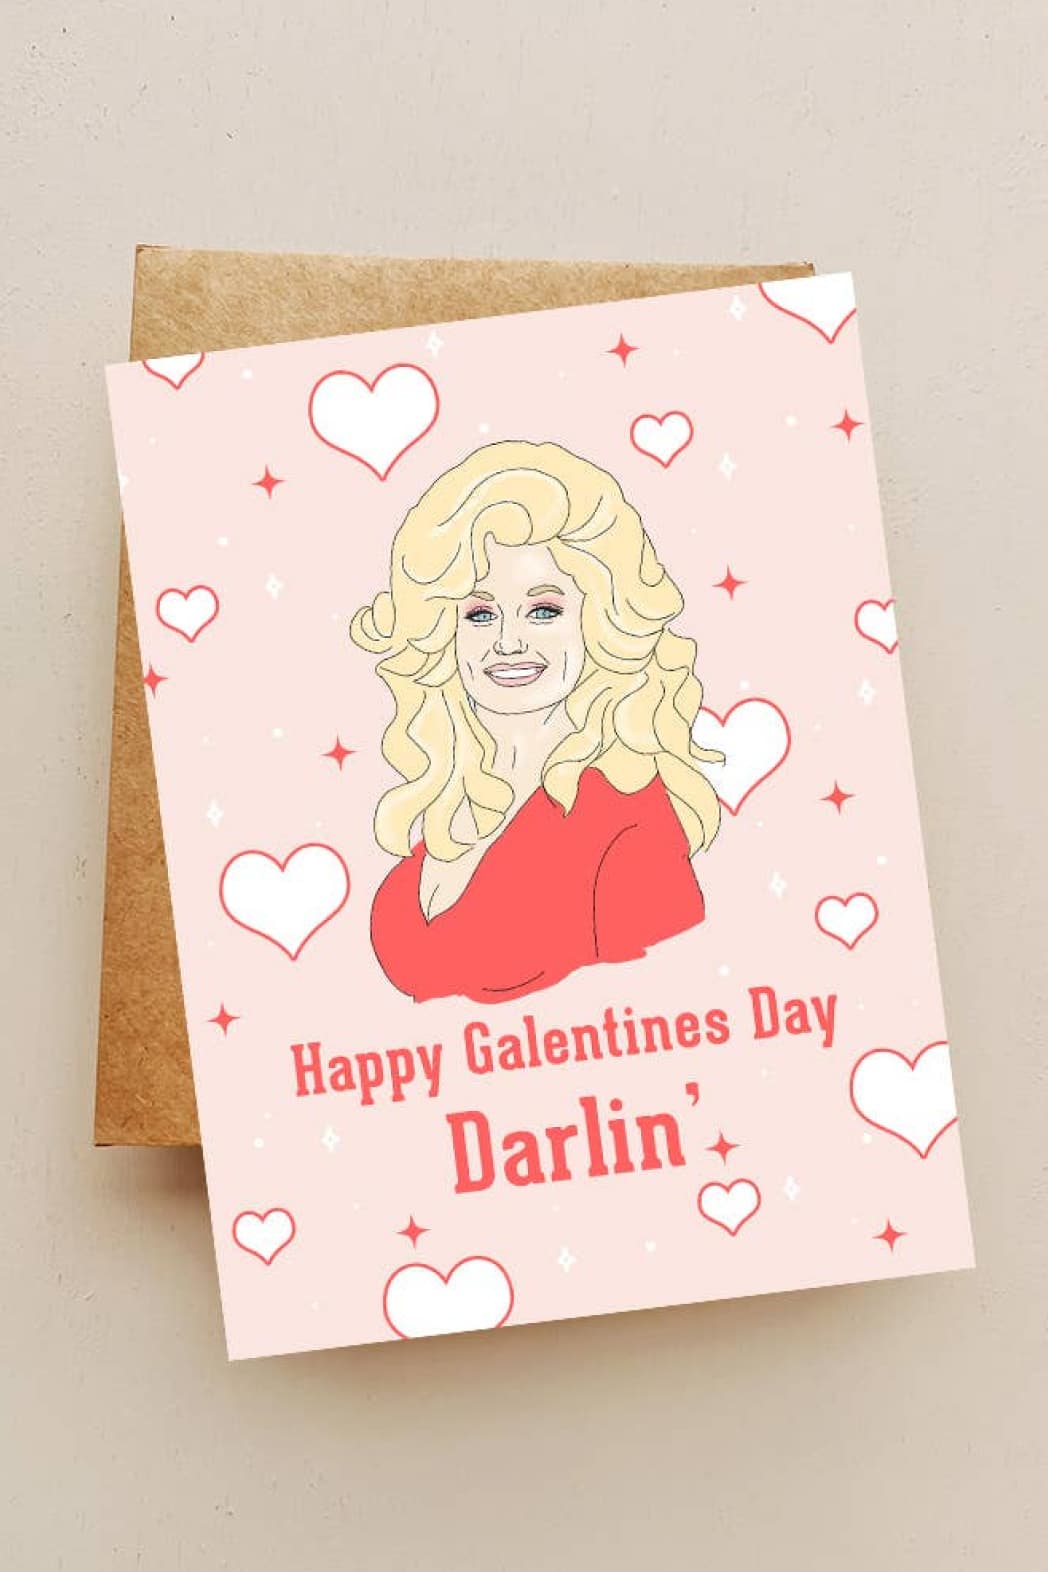 Dolly Happy Galentines Day Darlin' Card - Greeting & Note Cards